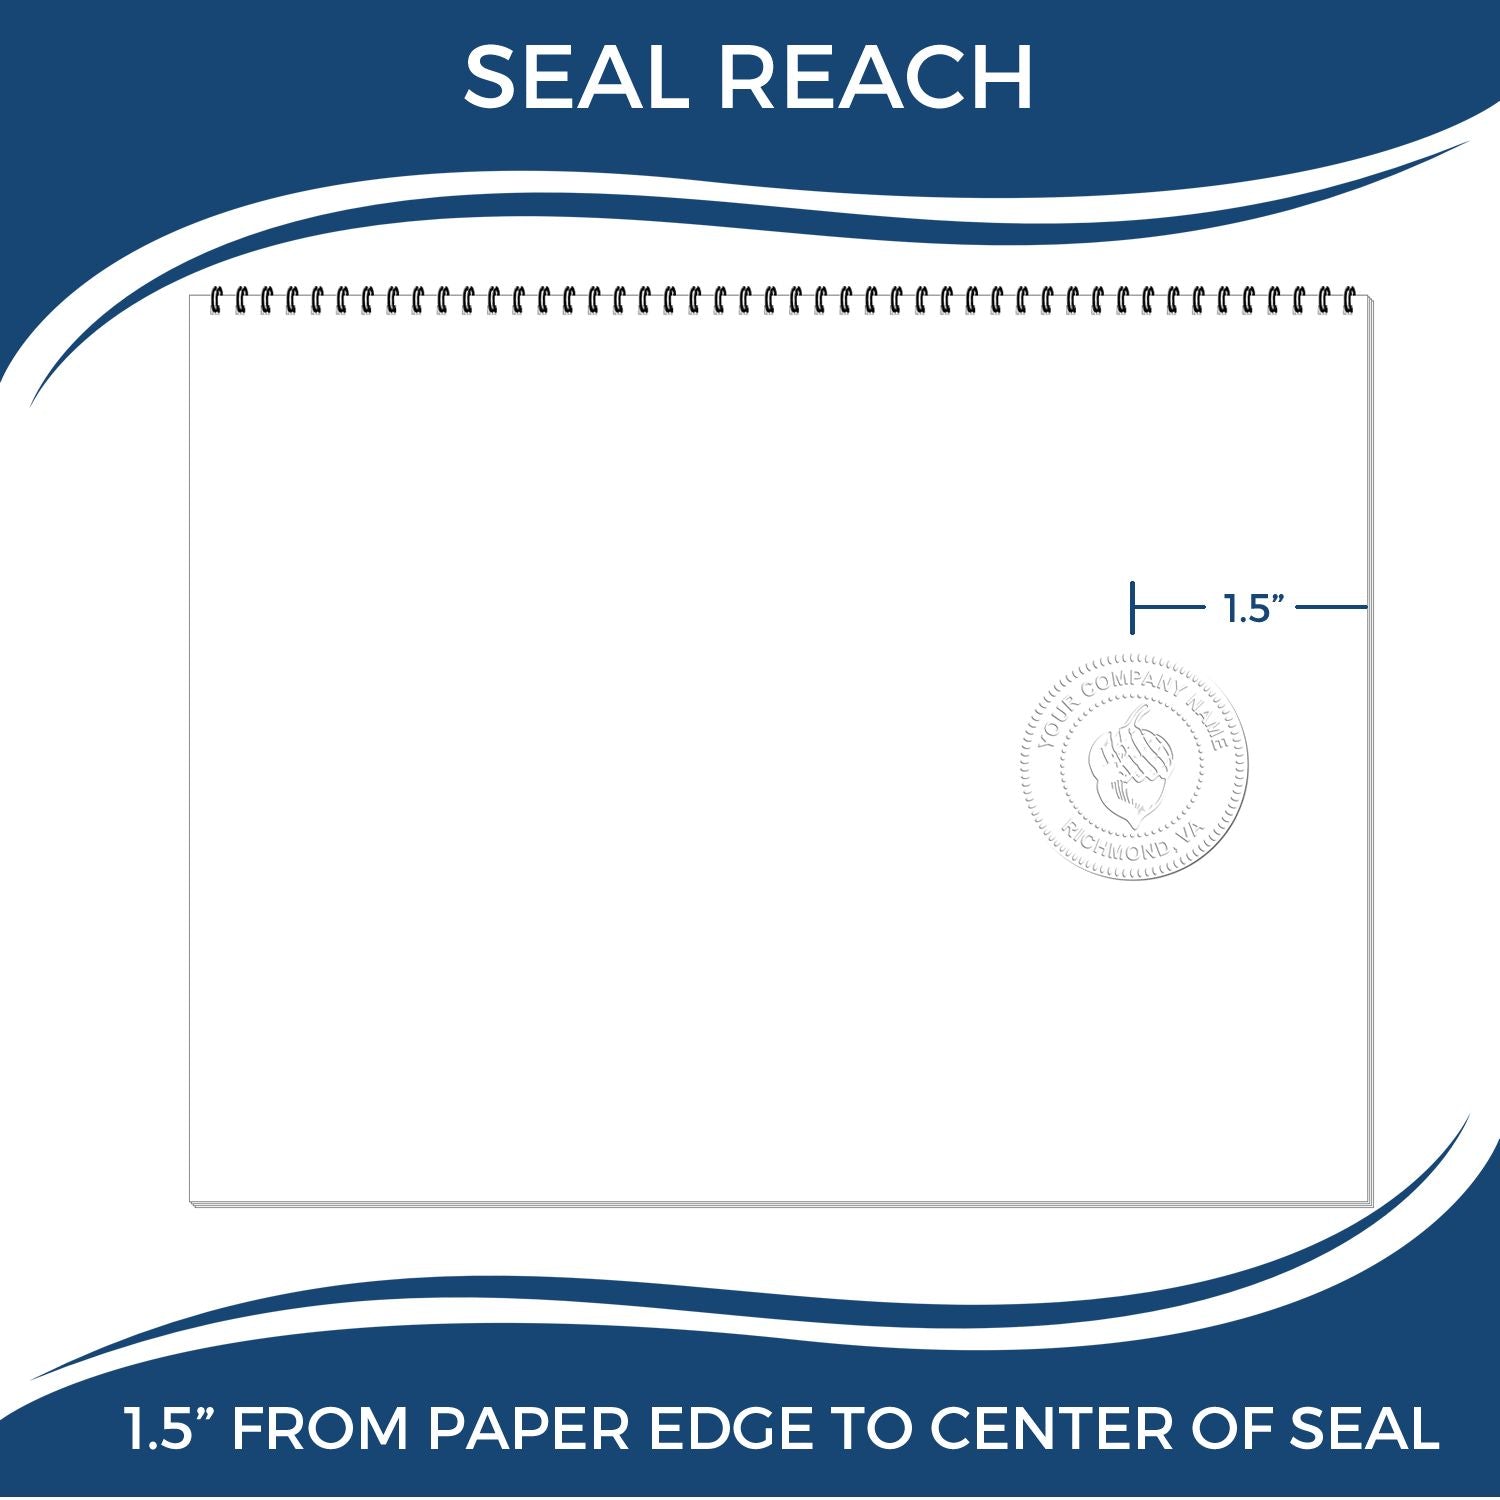 An infographic showing the seal reach which is represented by a ruler and a miniature seal image of the Hybrid Oregon Engineer Seal